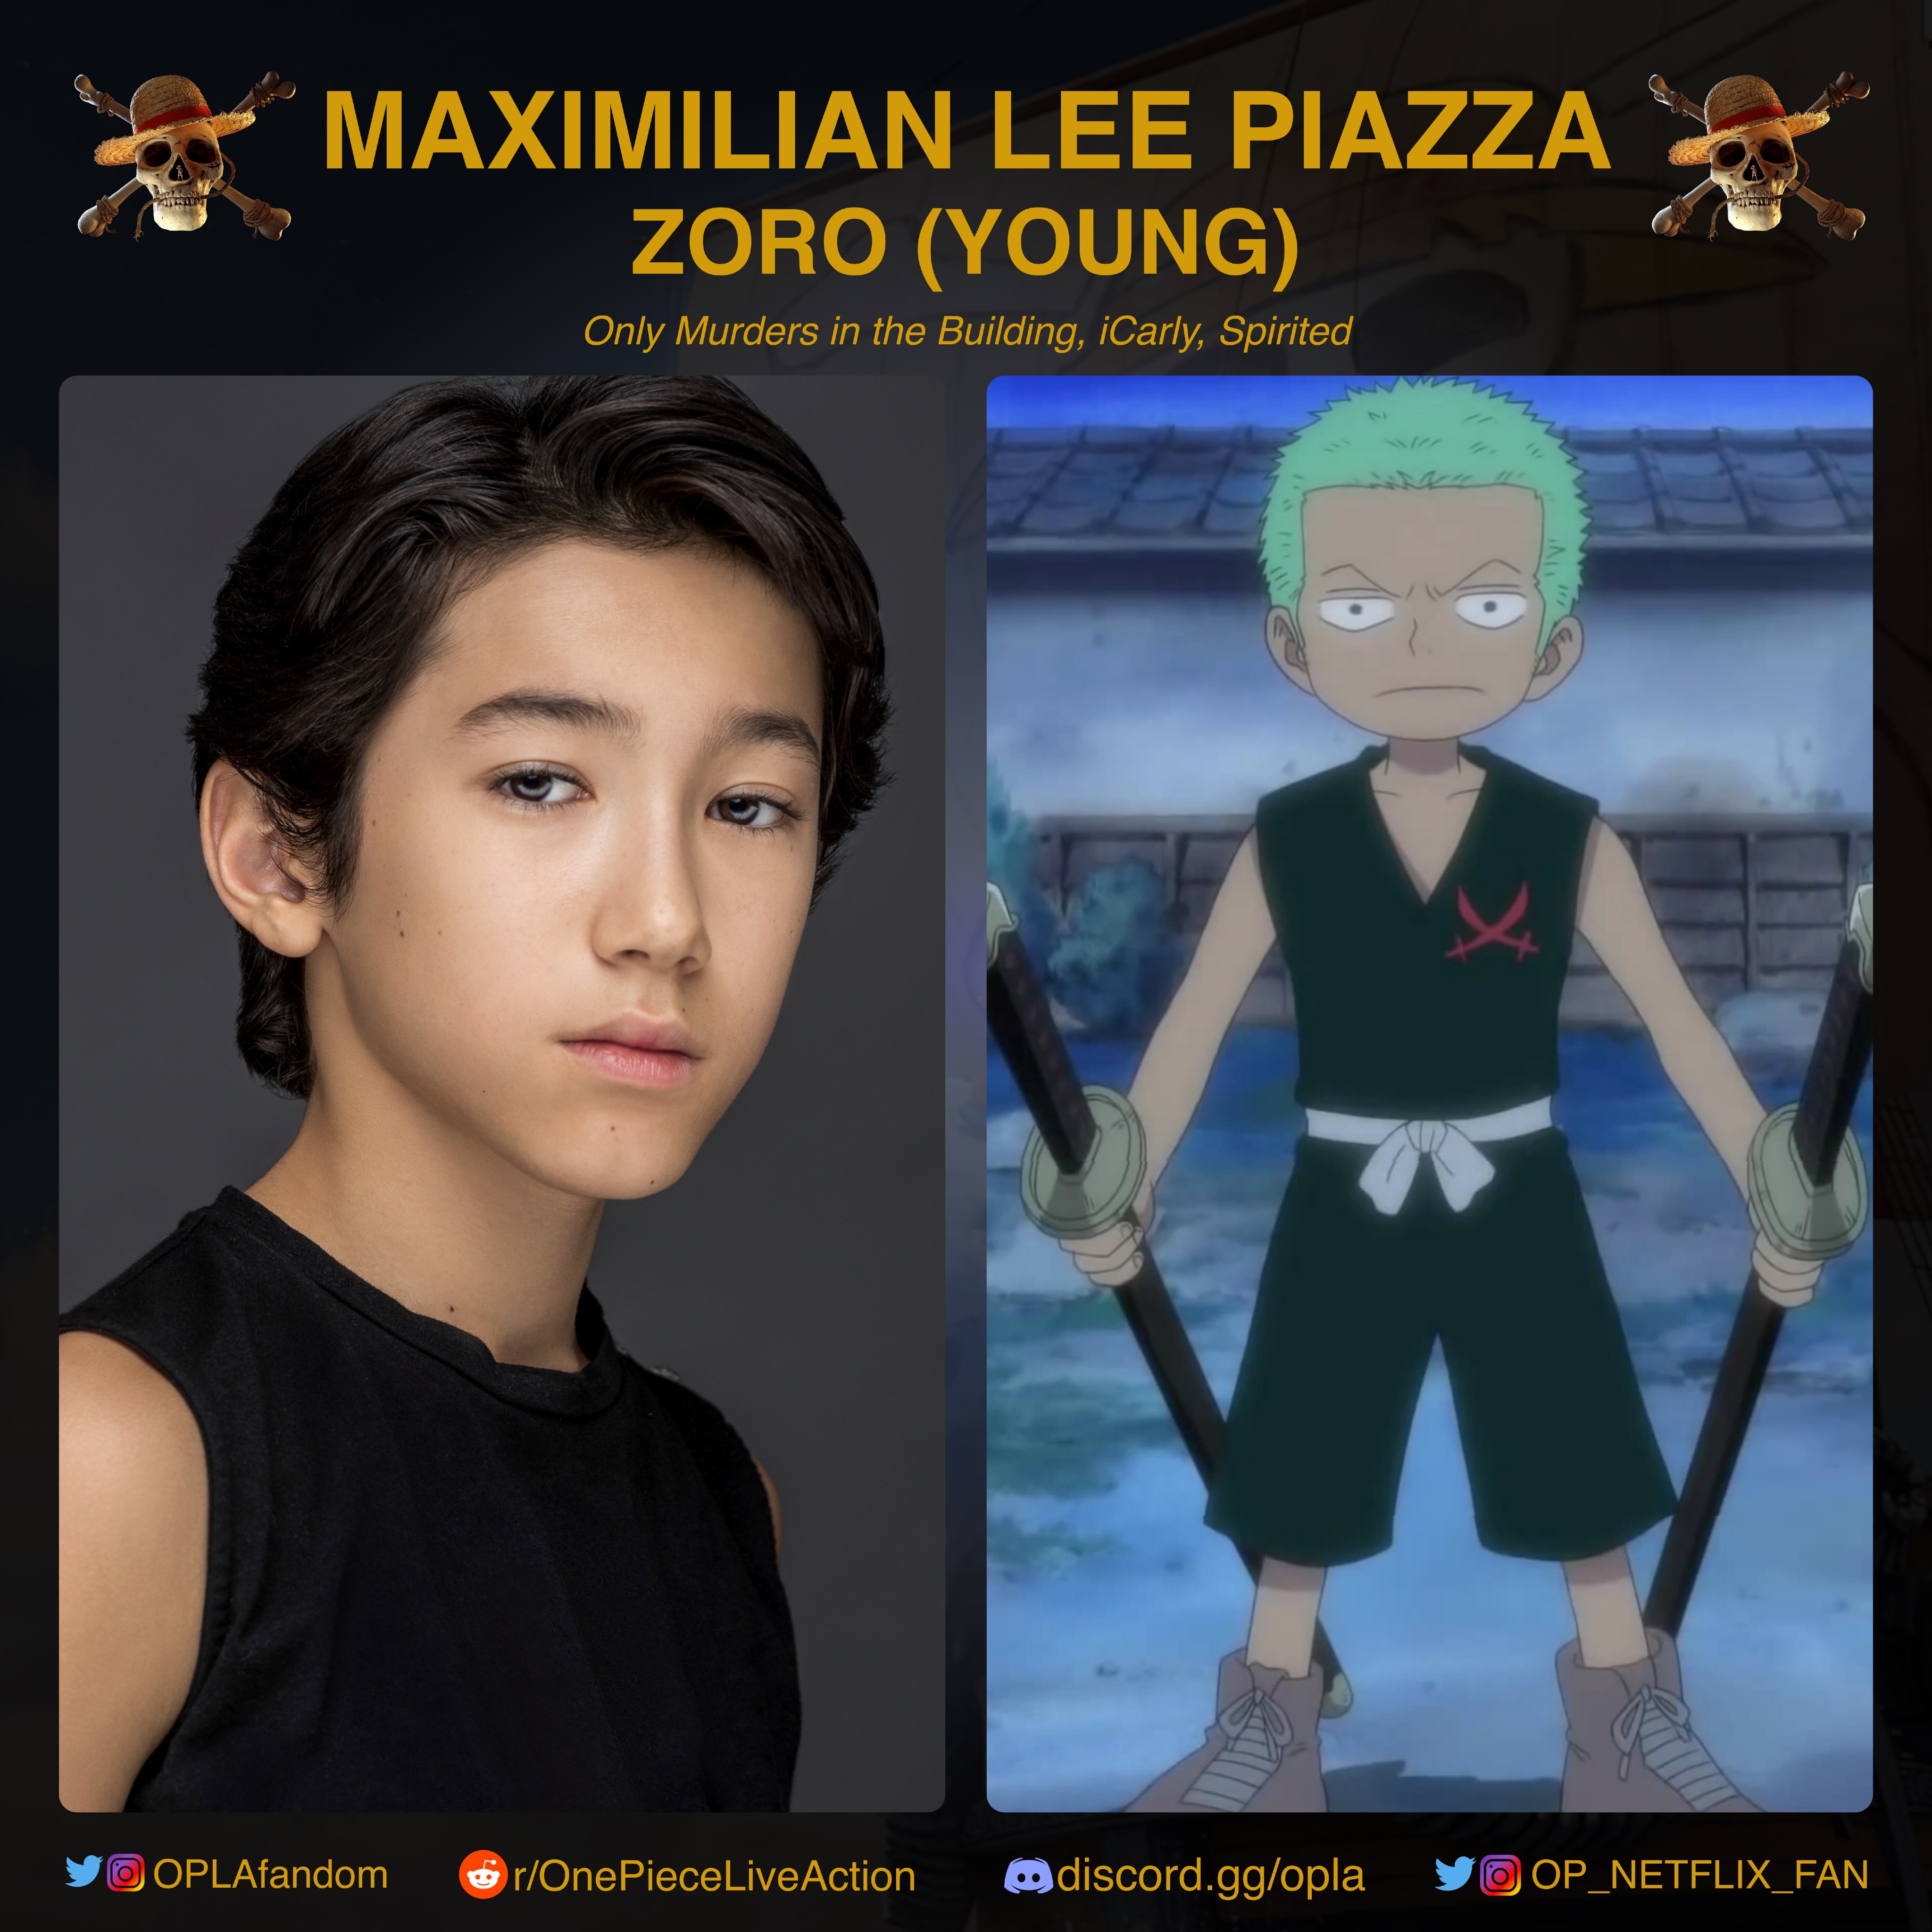 ONE PIECE NETFLIX FAN on X: Maximilian Lee Piazza will be playing the role  of Young Zoro in One Piece Live Action  / X